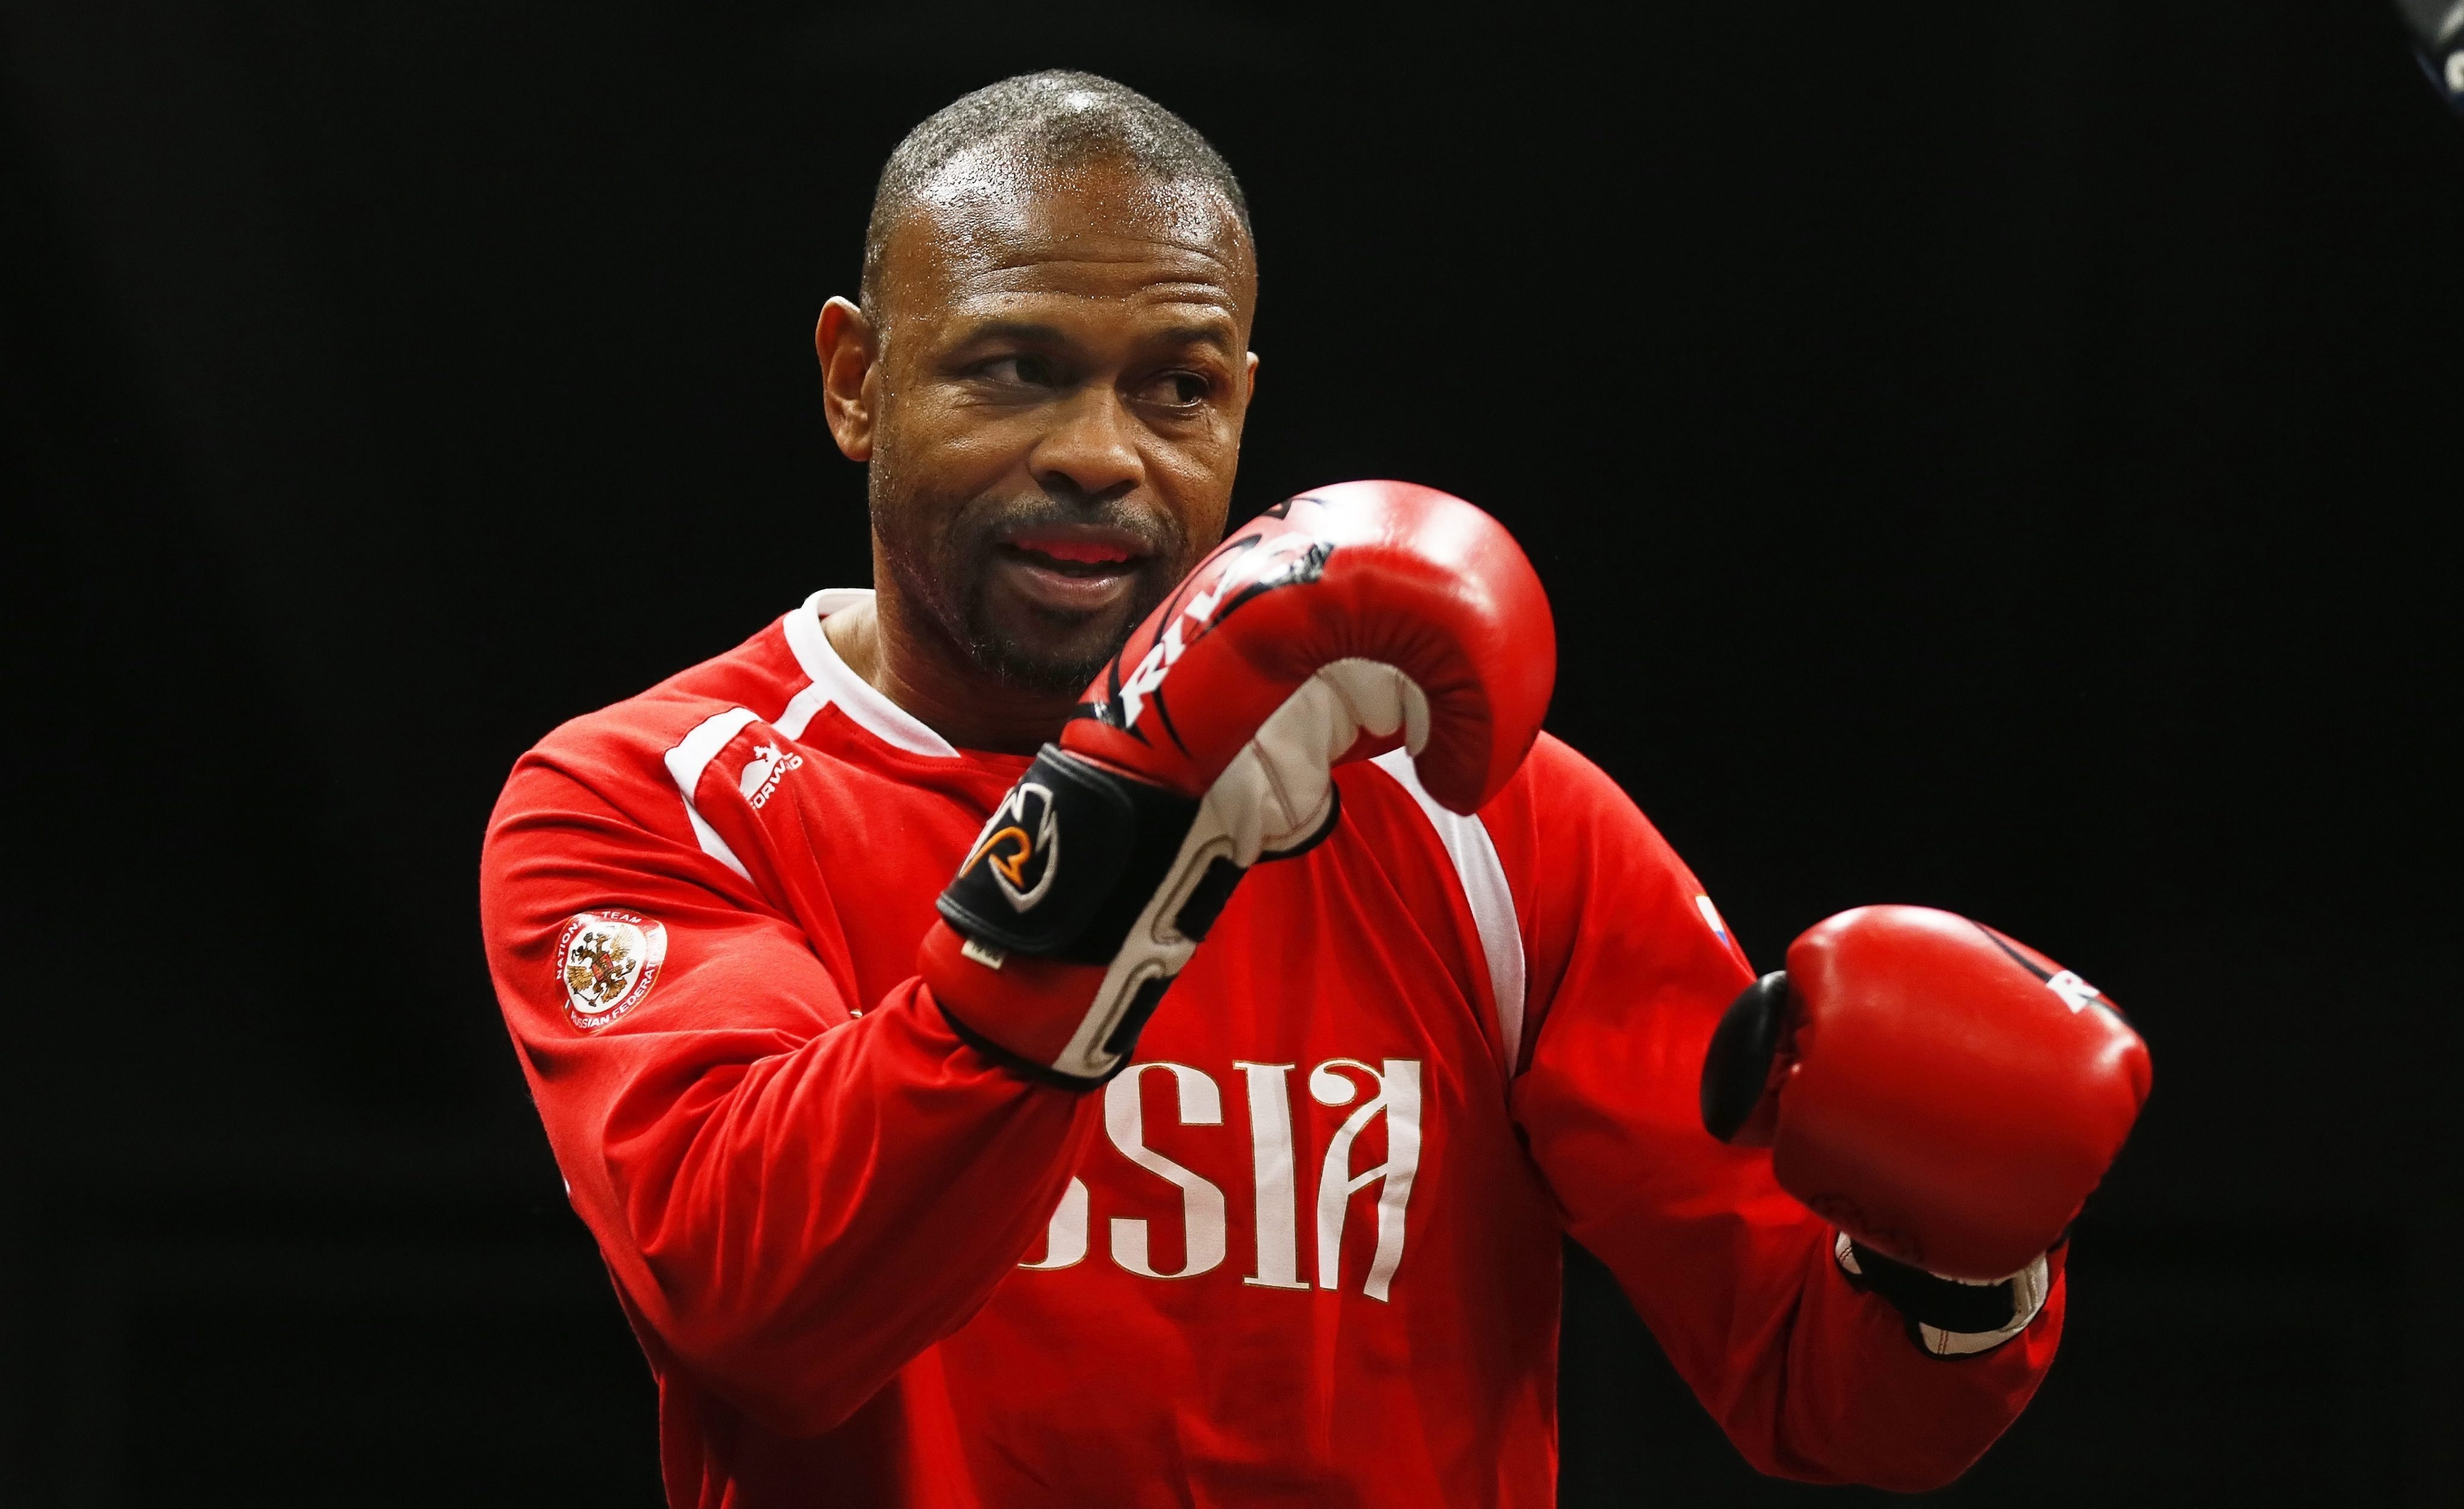 Roy Jones Jr. comes to the defense of Olympic boxing